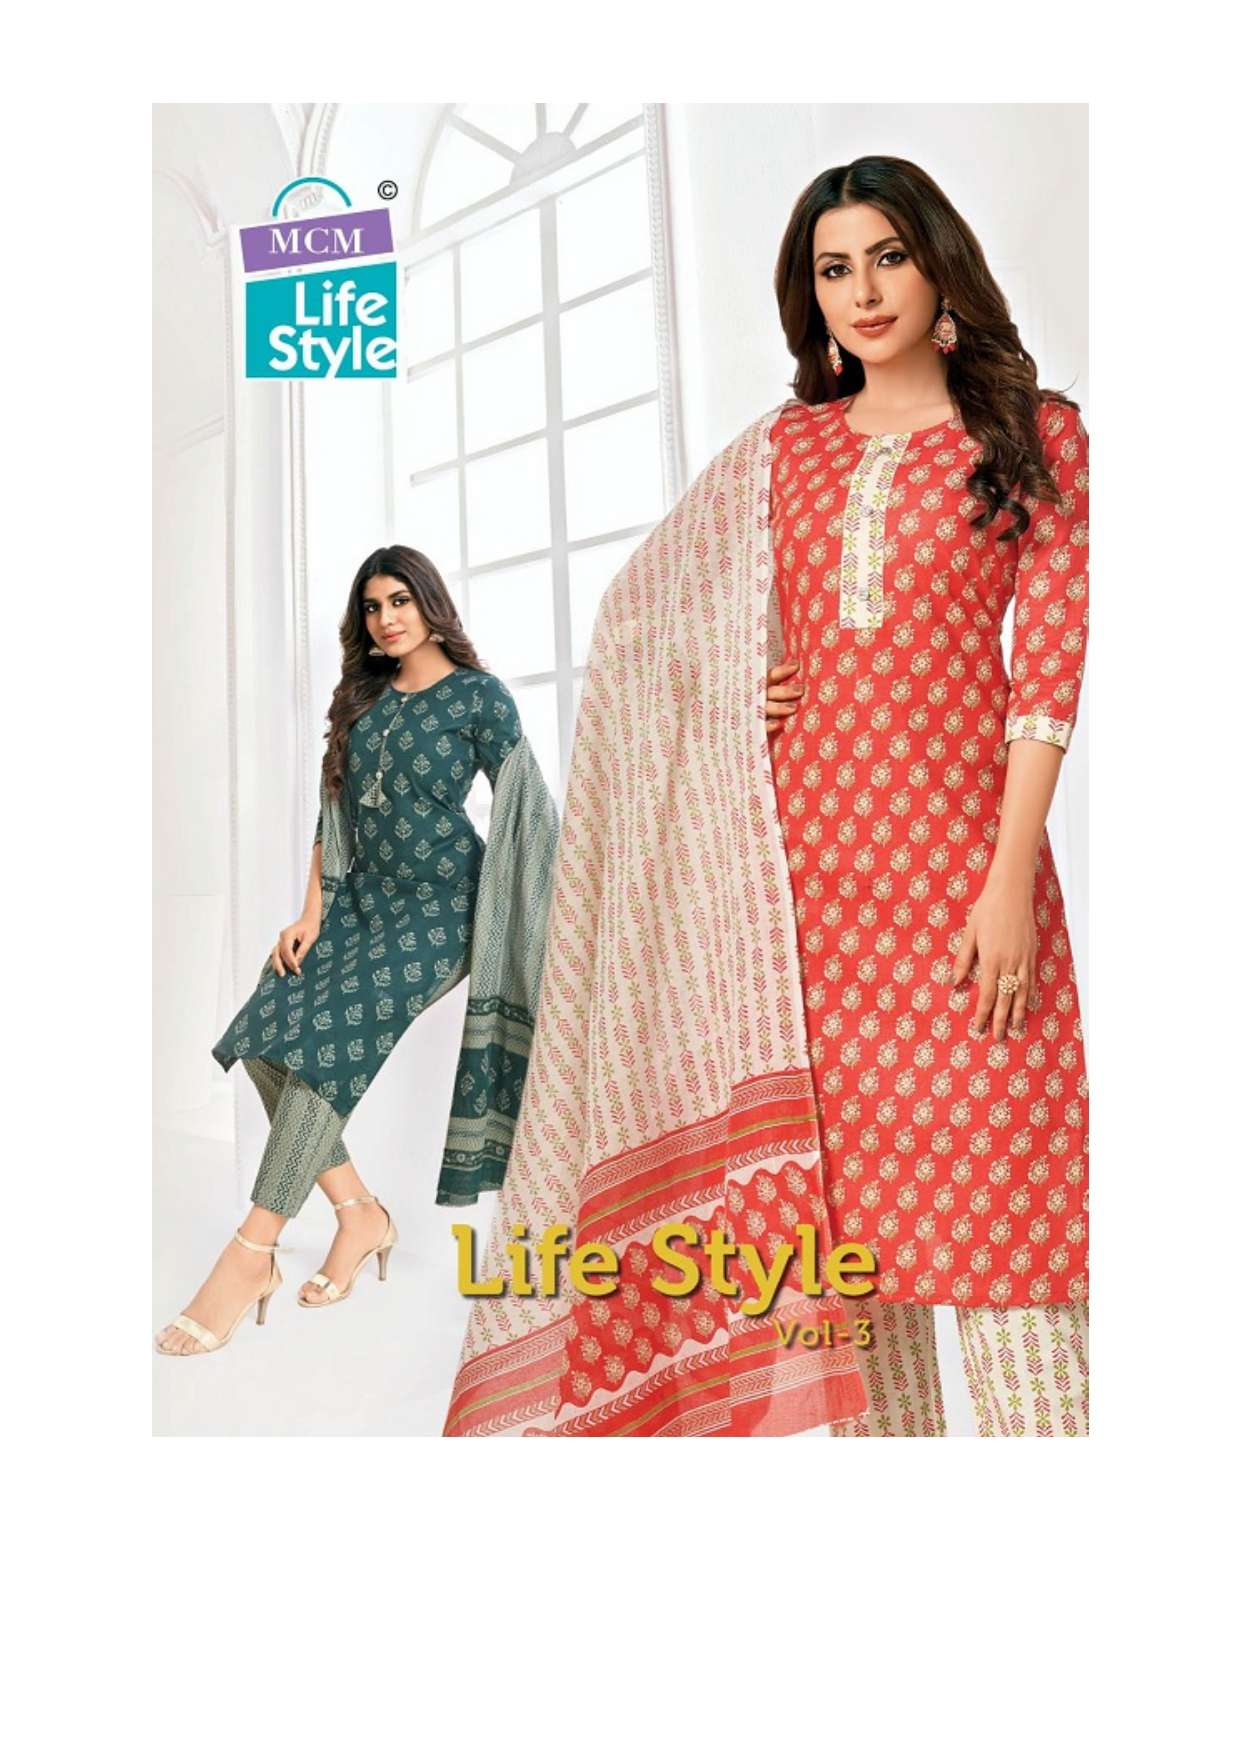 LIFE STYLE VOL 3 COTTON PRINTED KURTI WITH PANT AND DUPATTA BY MCM BRAND WHOLESALER AND DEALER